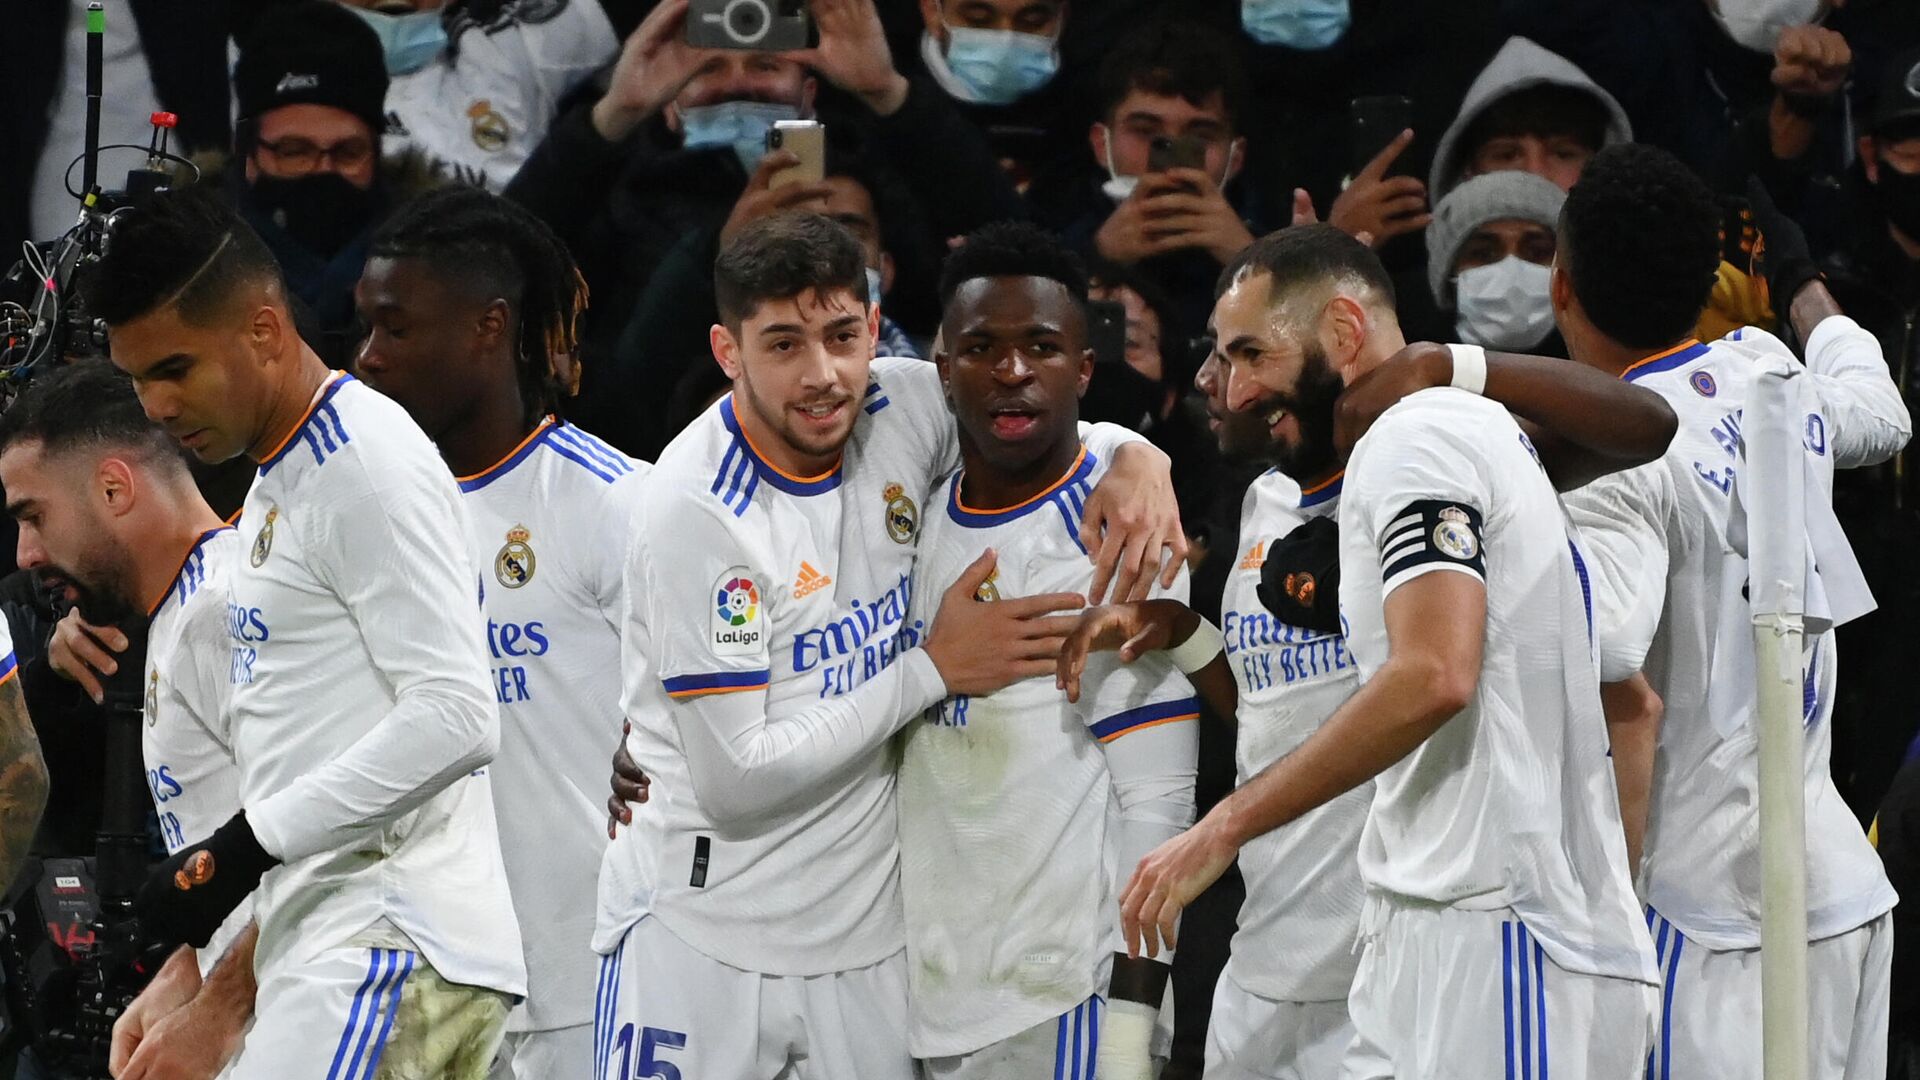 Real Madrid's Brazilian forward Vinicius Junior (C) is congratulated by teammates after scoring a goal during the Spanish league football match between Real Madrid CF and Sevilla FC at the Santiago Bernabeu stadium in Madrid on November 28, 2021. (Photo by GABRIEL BOUYS / AFP) - РИА Новости, 1920, 29.11.2021